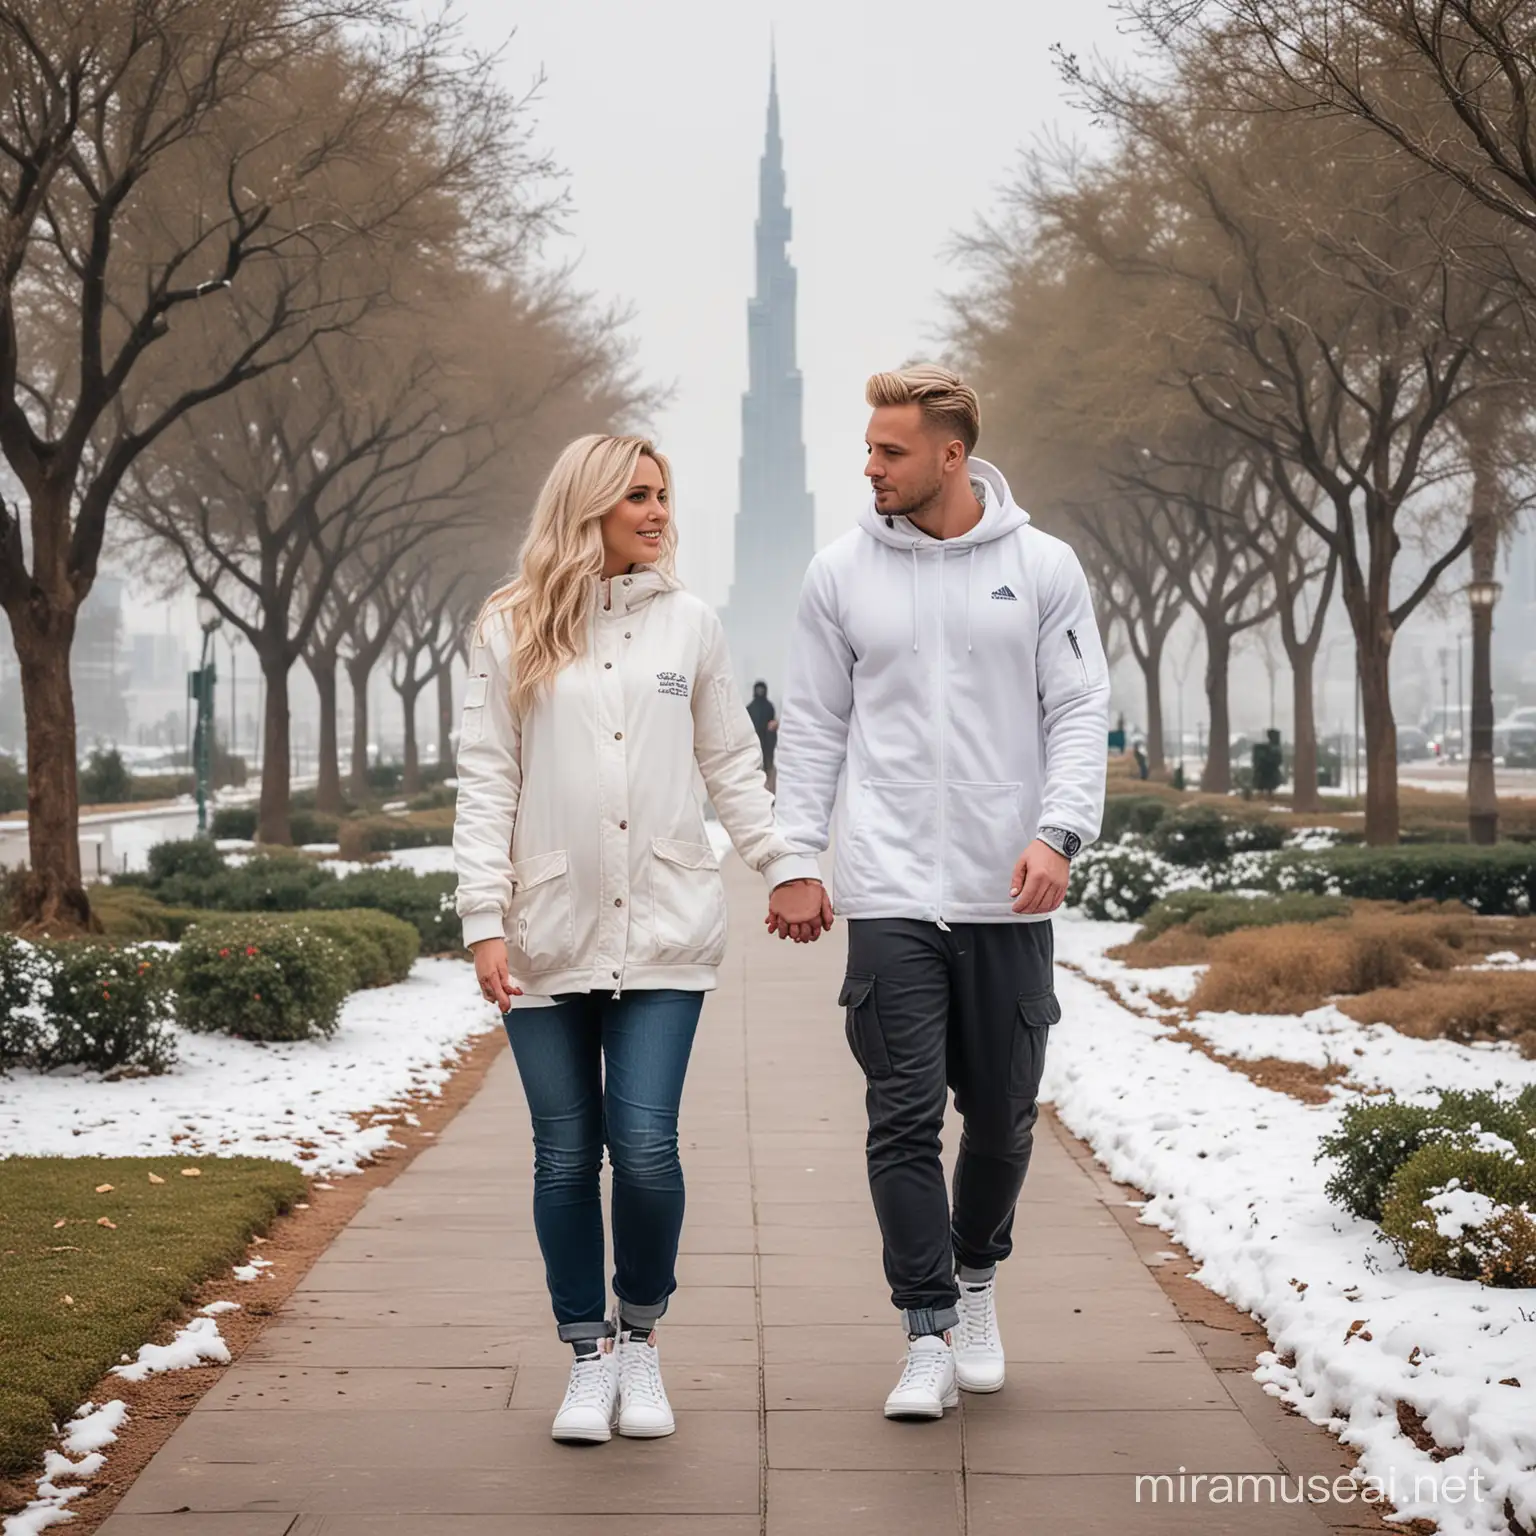 Stylish Pregnant Couple Walking in Snowy Park with Iconic Landmarks in Background